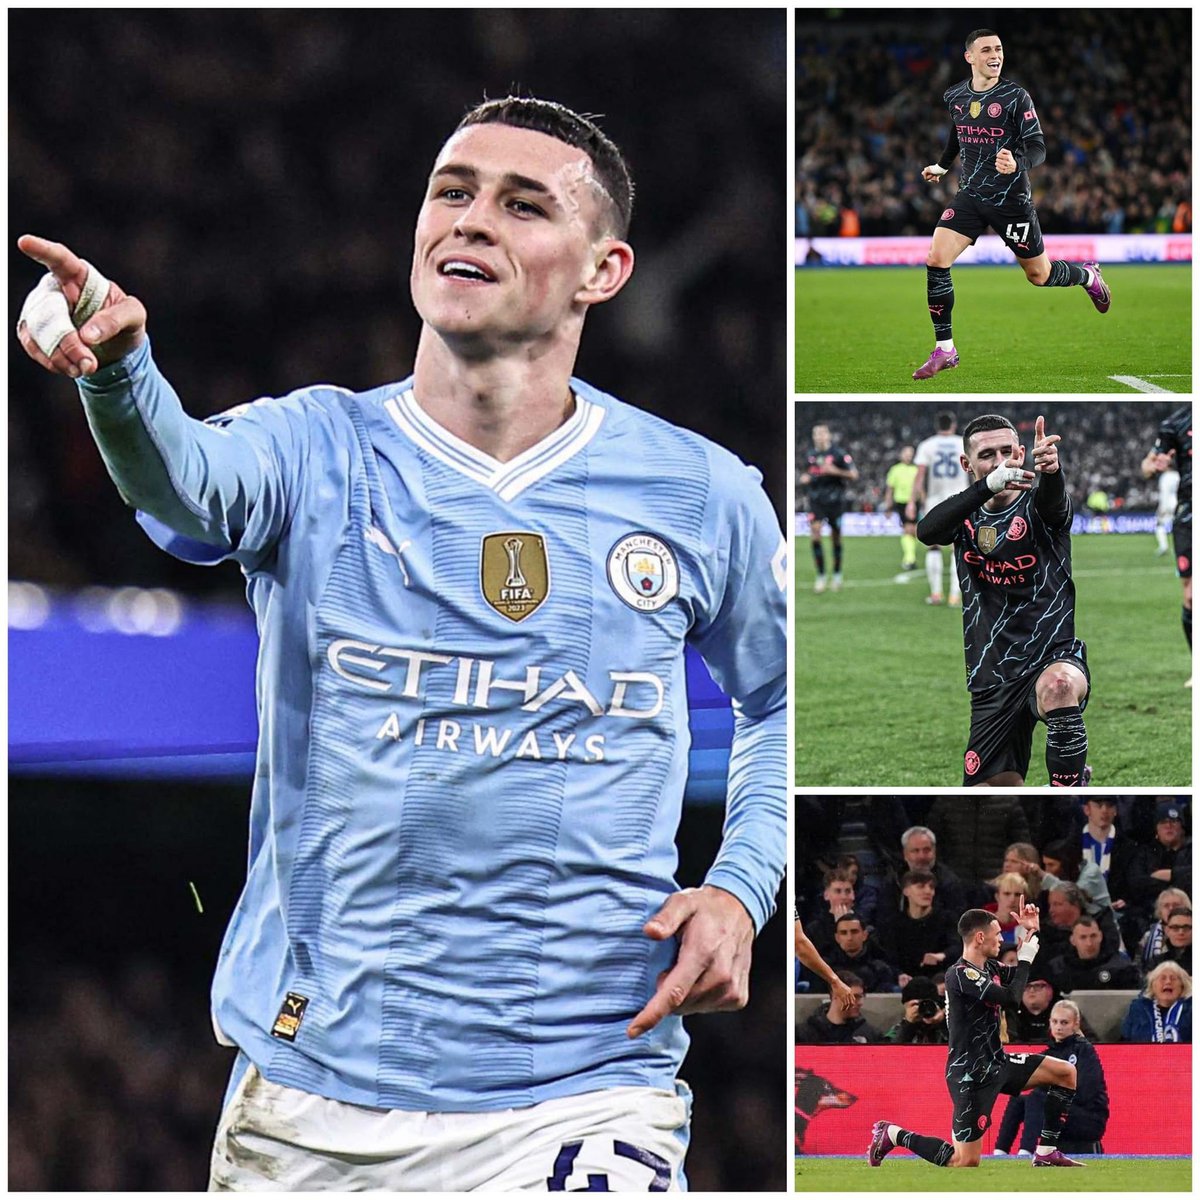 Phil Foden this season: 24 goals 7 from outside the box 2 from direct free kick 0 from penalties Only Watkins has scored more non-penalty goals than Foden in the Premier League so far this season and he has scored a total of 51 Premier League goals without penalties in his